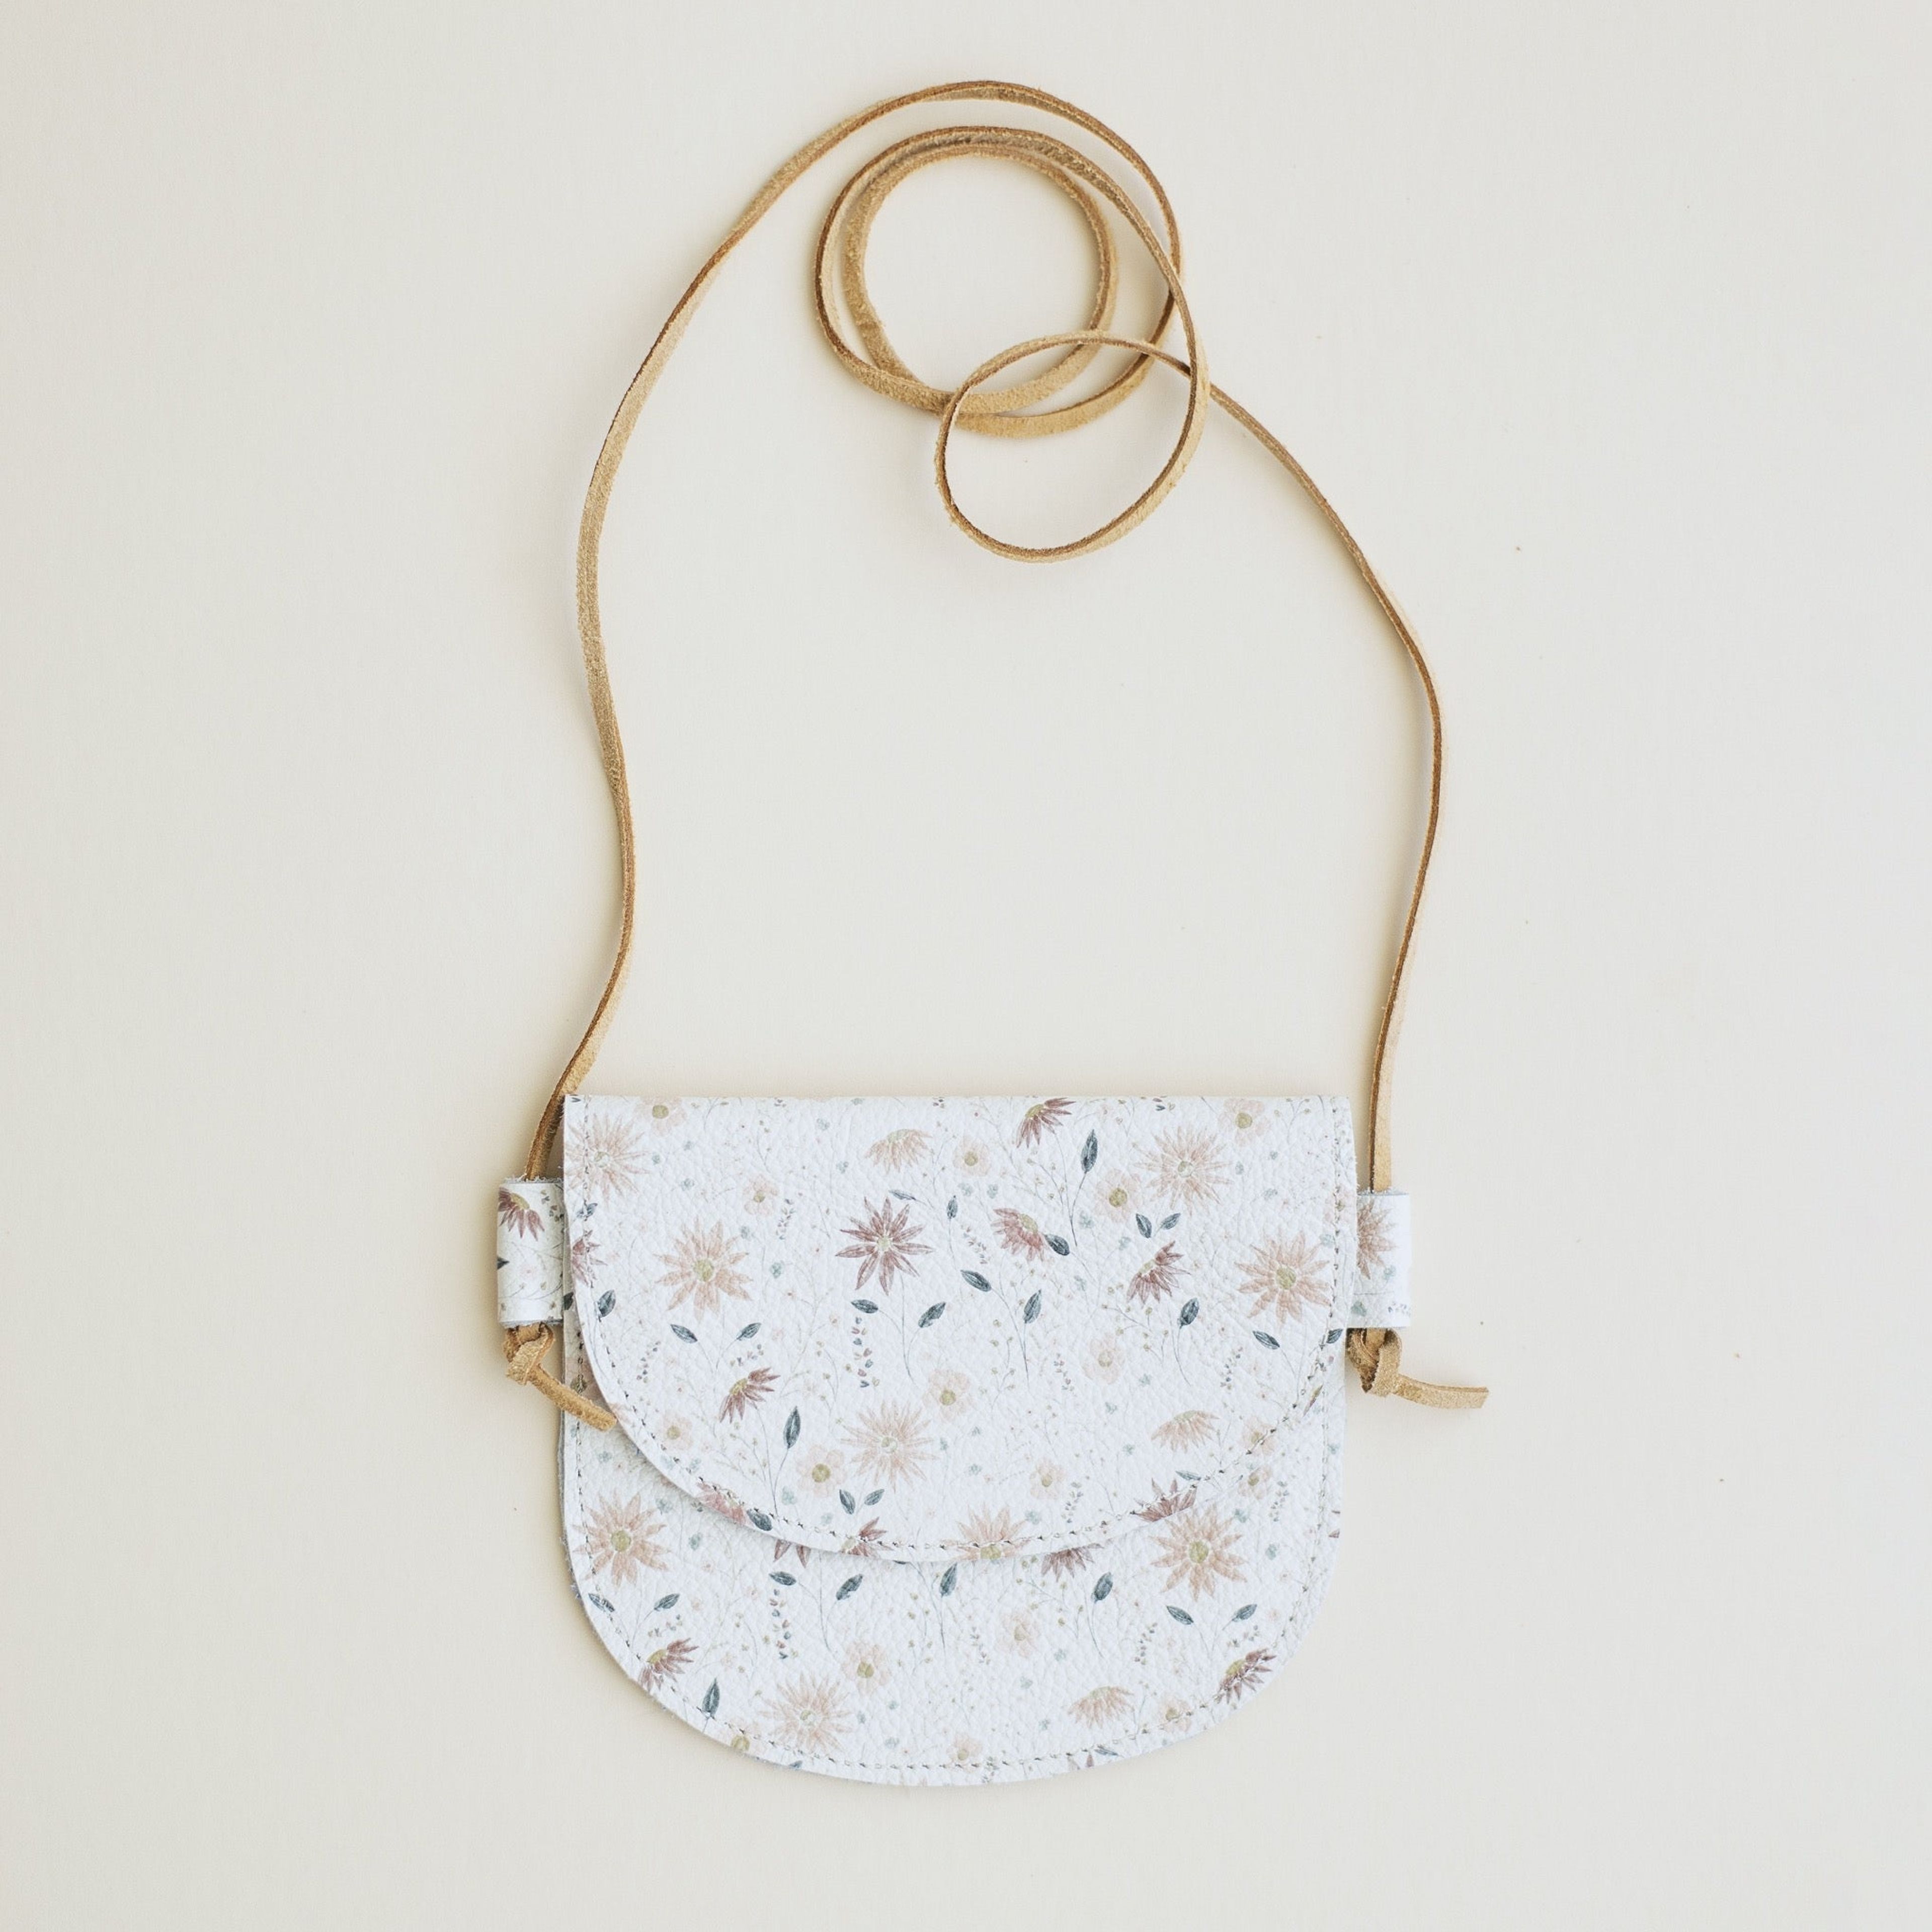 Toddler Leather Purse in Bloom